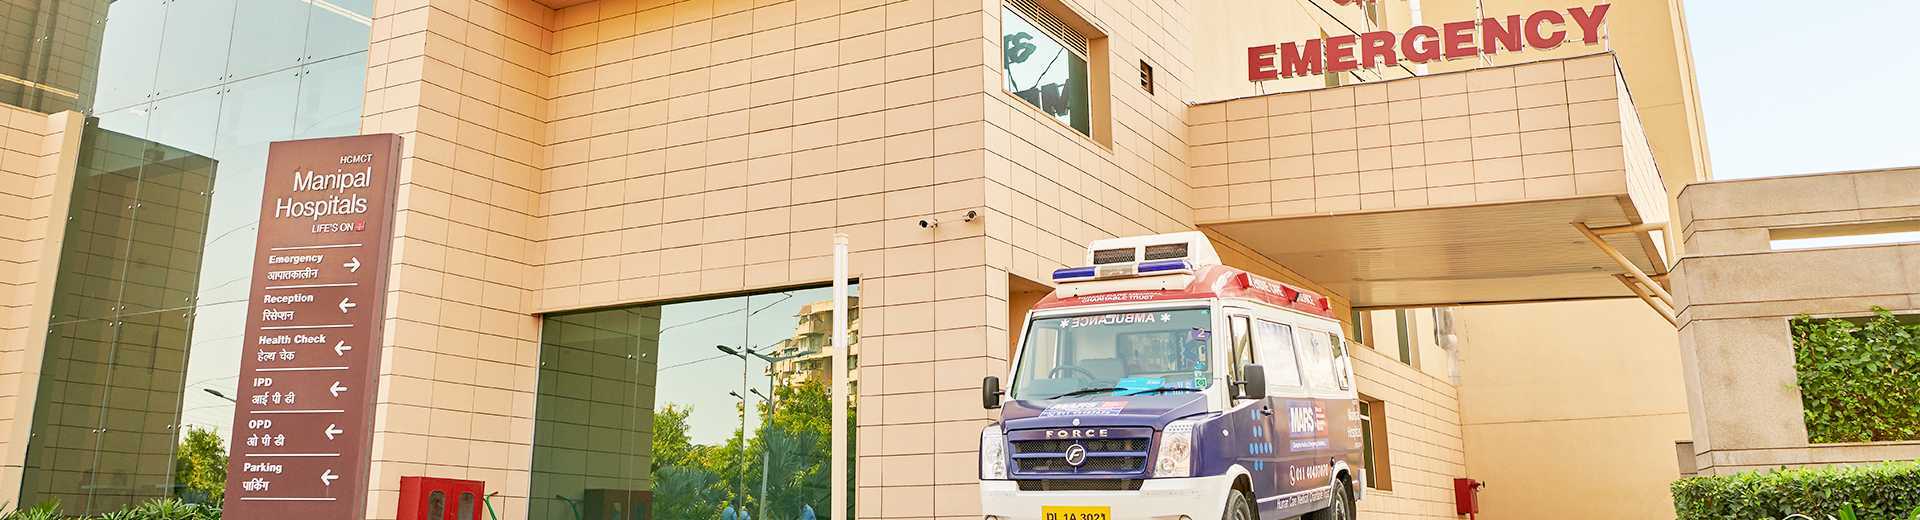 Best Accident & Emergency Care Hospital in Jaipur